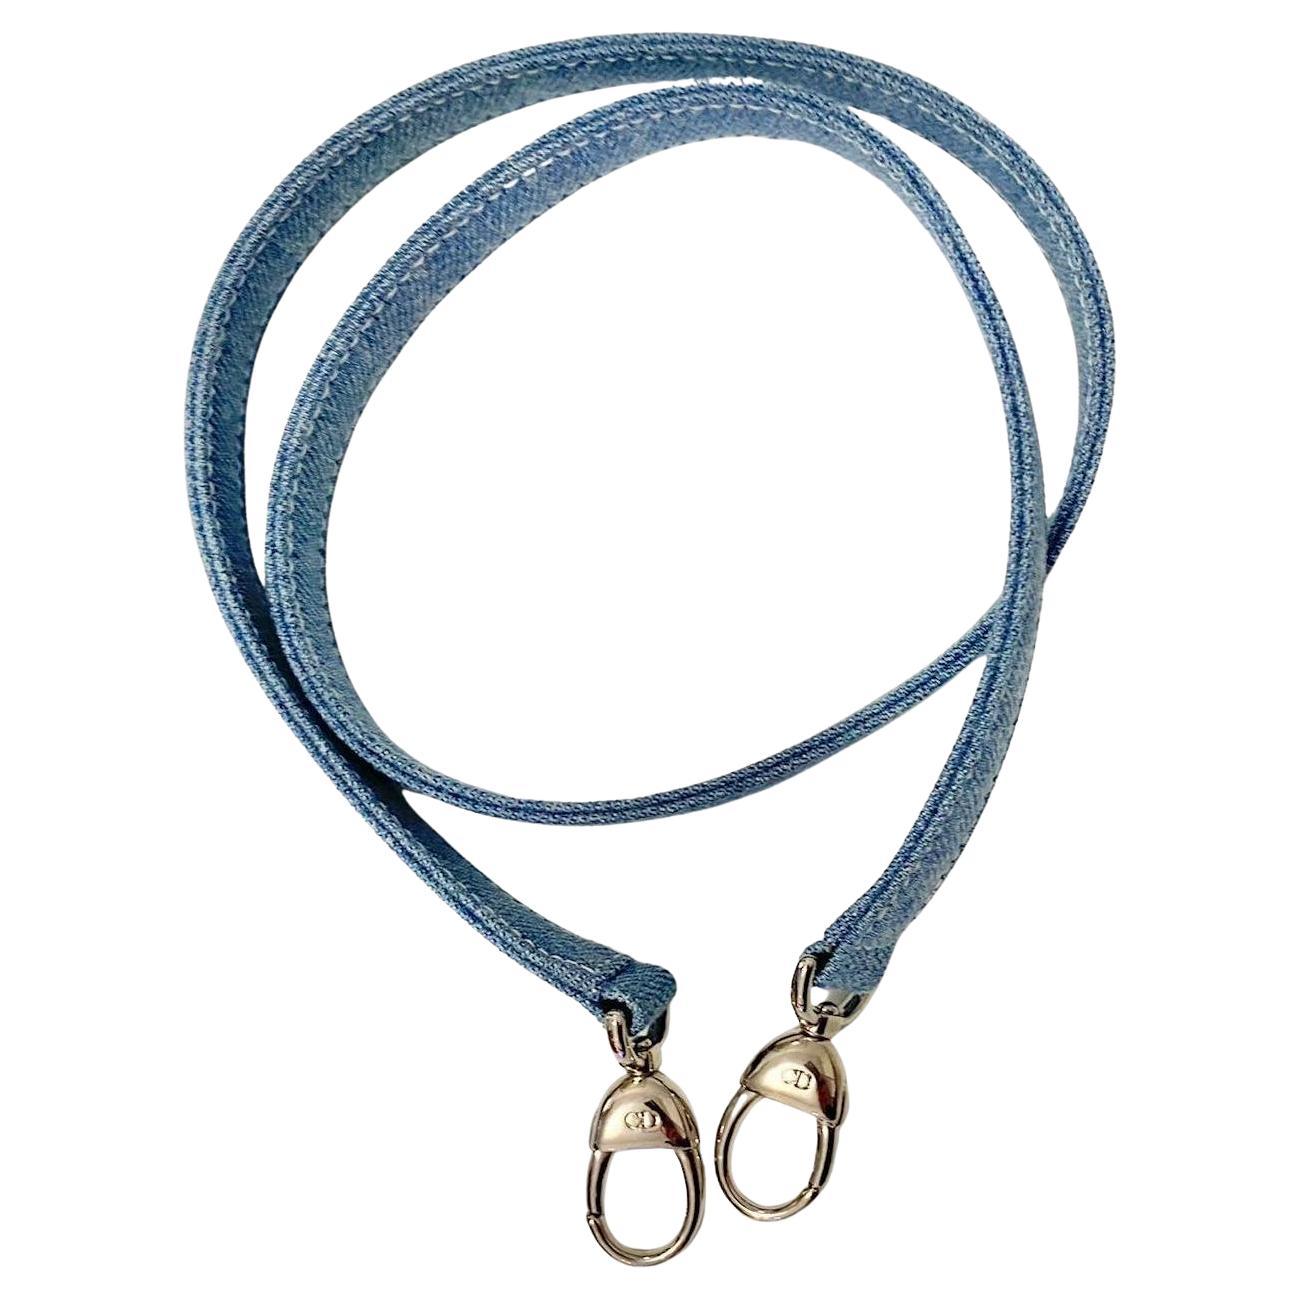 Christian Dior's light denim bag strap features durable, shiny silver-toned metal accents stamped CD

Condition: 200os, vintage, like new 

Measurements: 34x0.5in / 90x2cm 